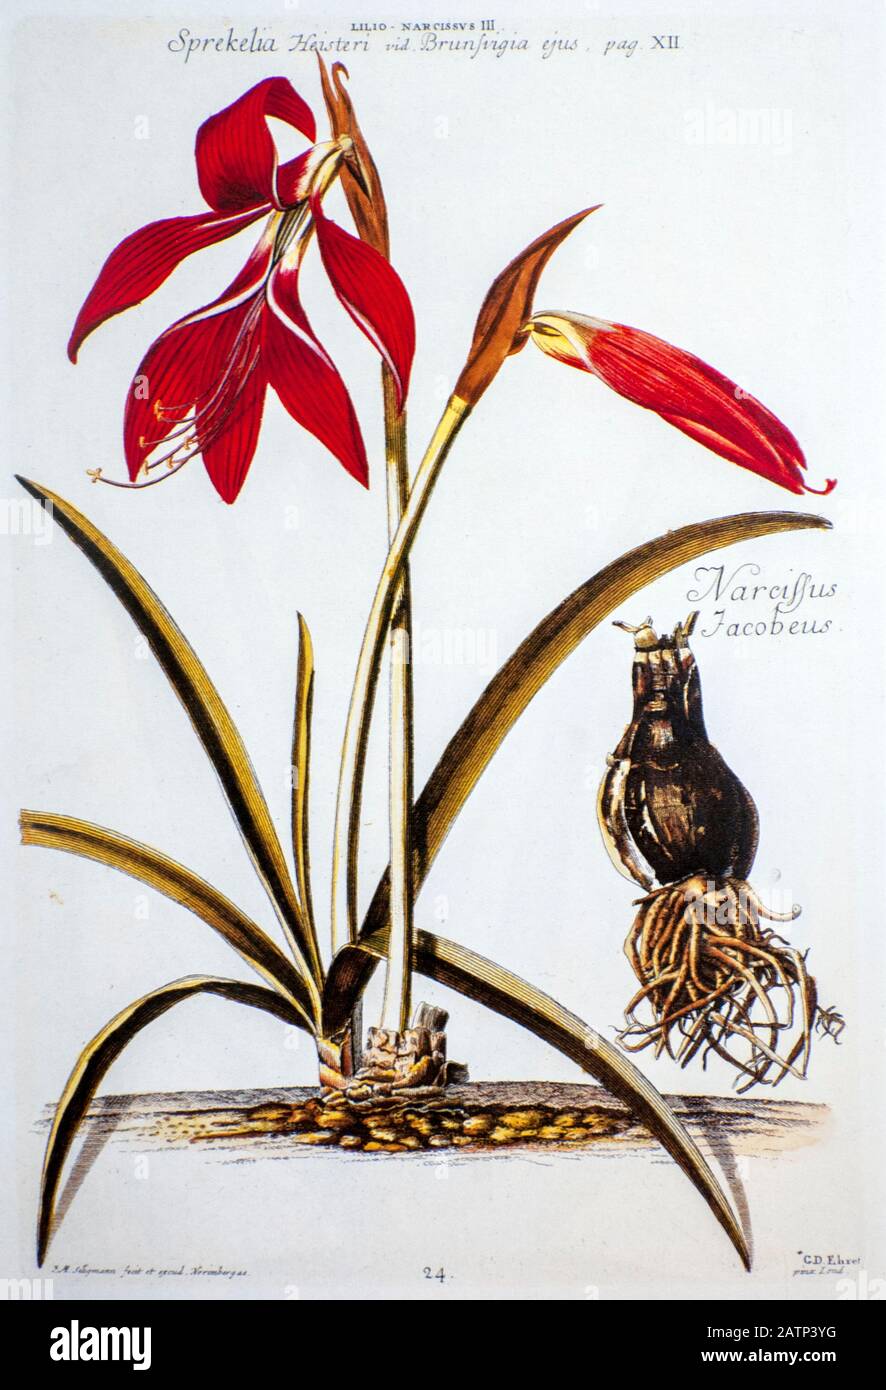 Coloured Copperplate engraving of a Sprekelia formosissima (Jacobean Lily) from hortus nitidissimus by Christoph Jakob Trew (Nuremberg 1750-1792) Stock Photo